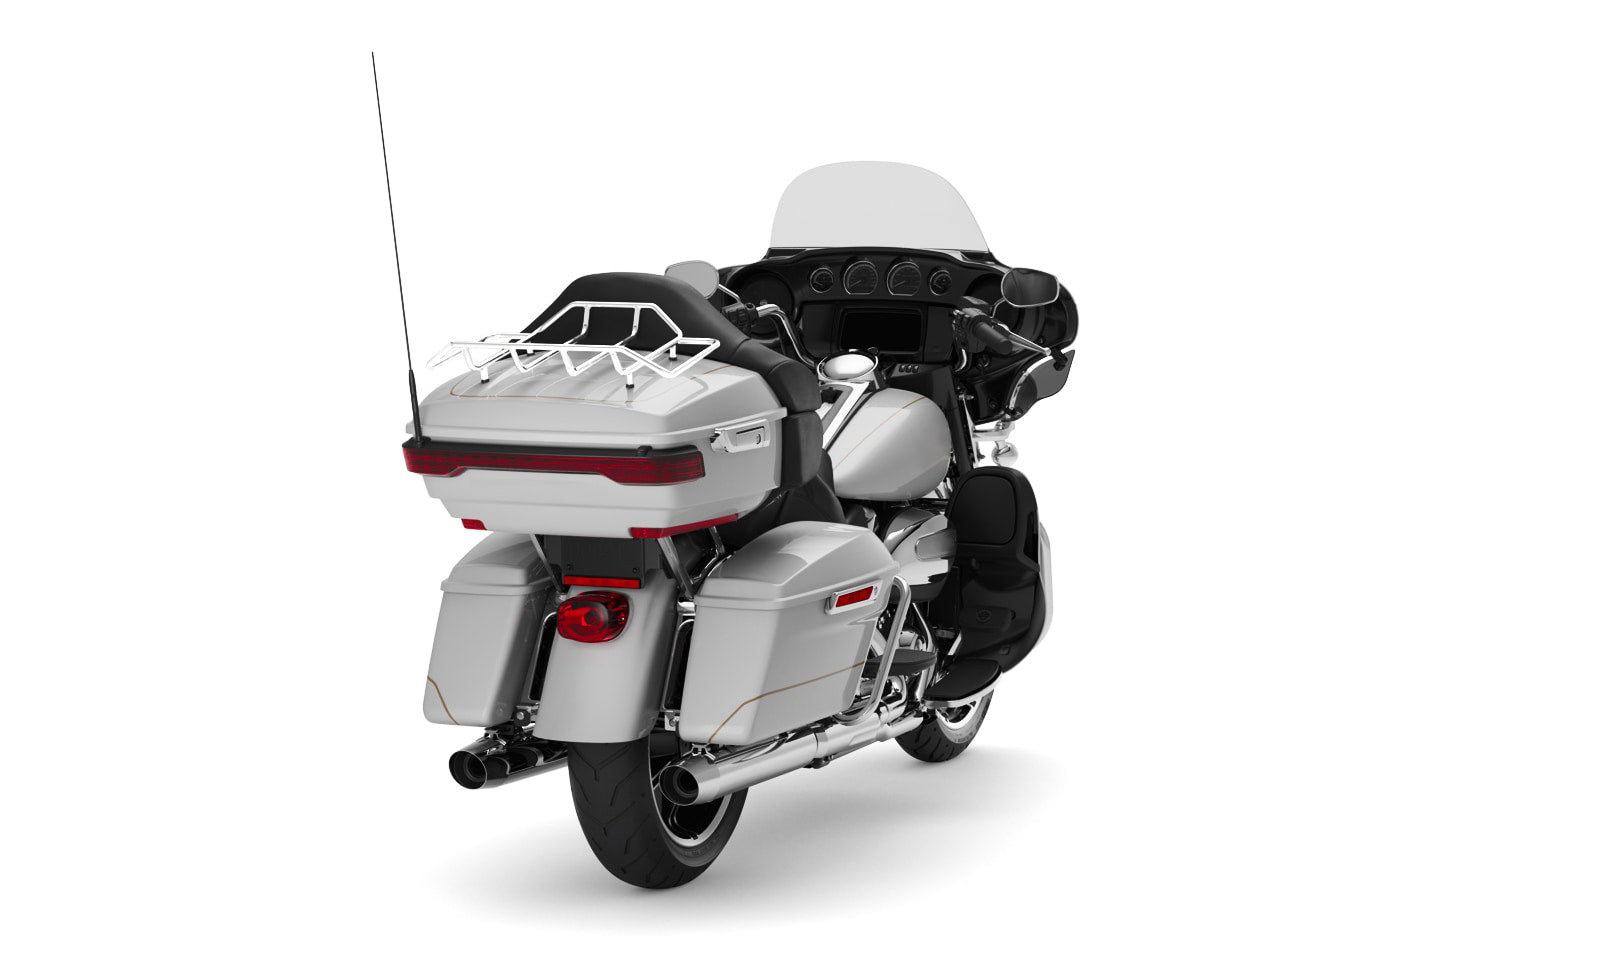 Viking Voyage Tour Pack Luggage Rack for Harley Road King Chrome Bag on Bike View @expand